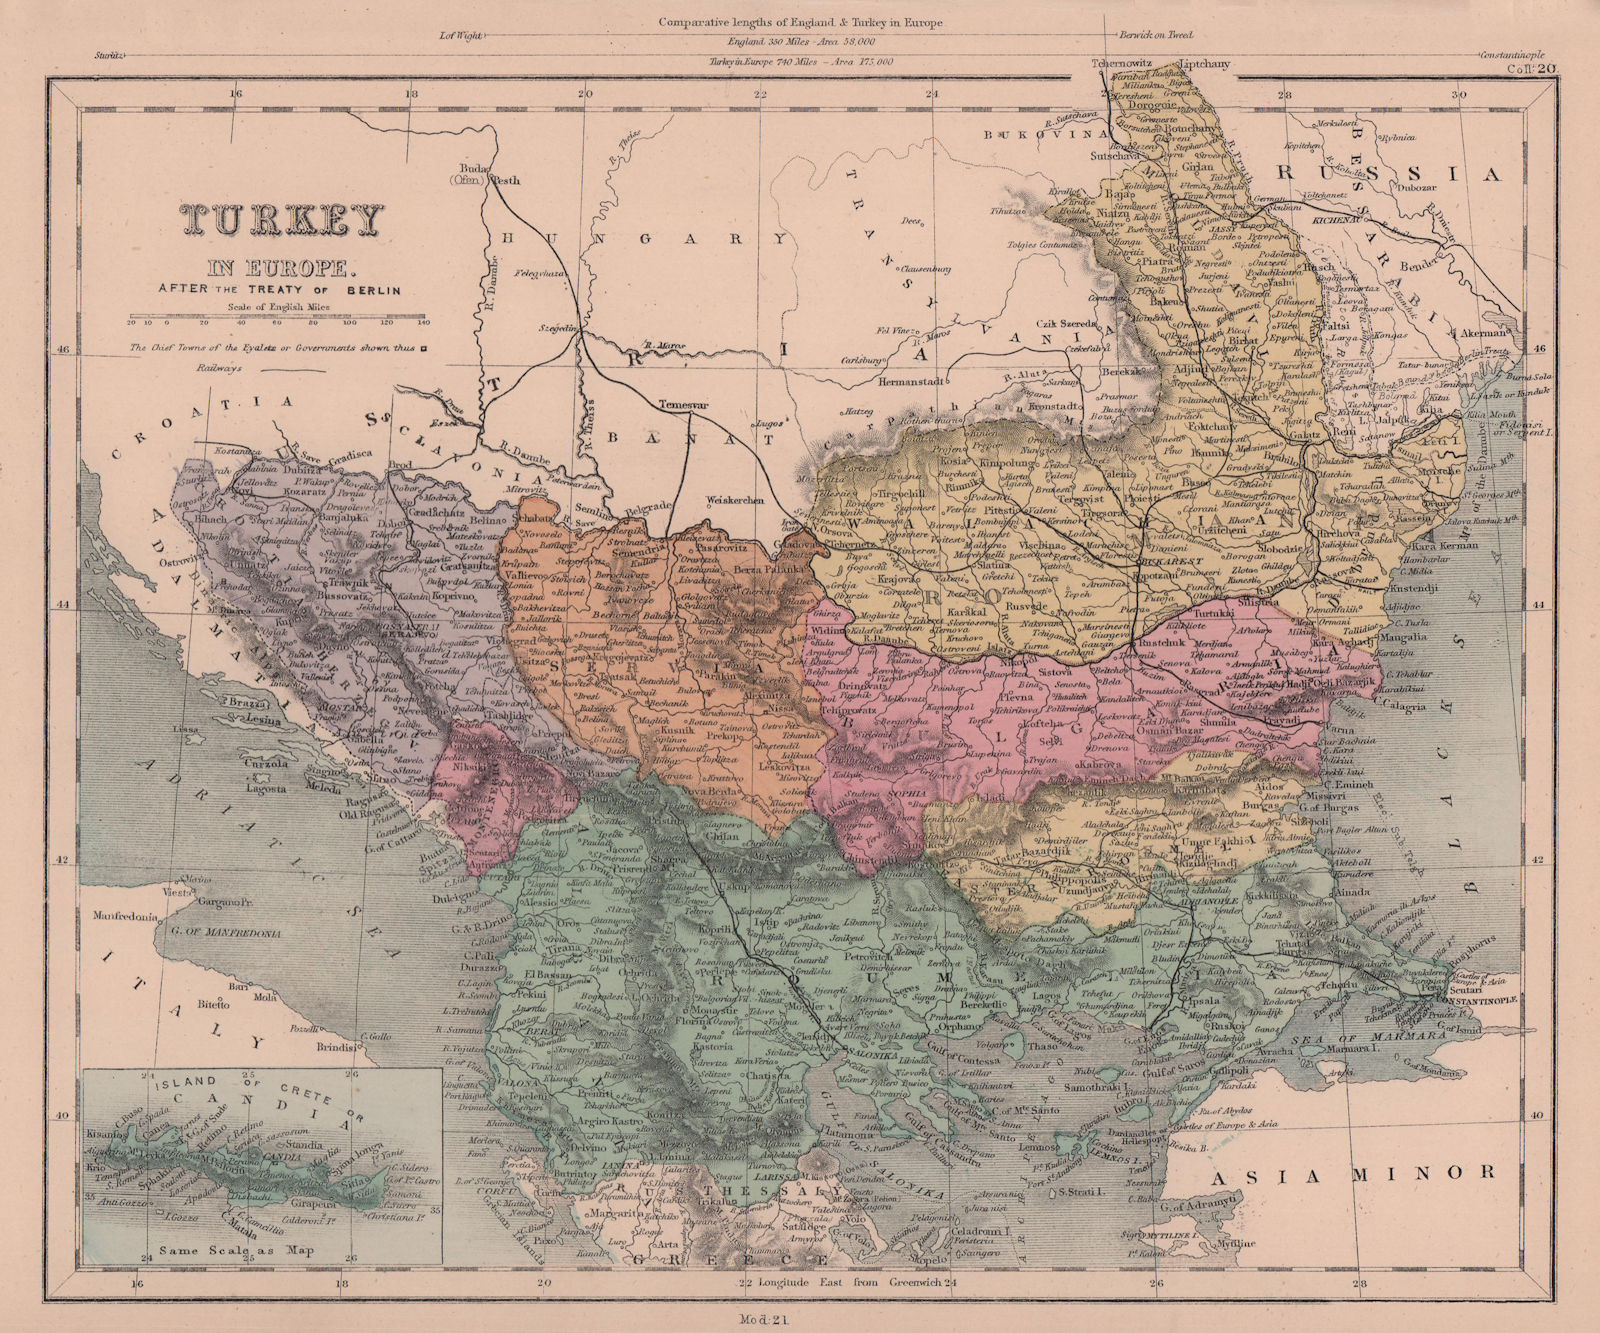 Associate Product Turkey In Europe after the Treaty of Berlin. Balkans. HUGHES 1876 old map